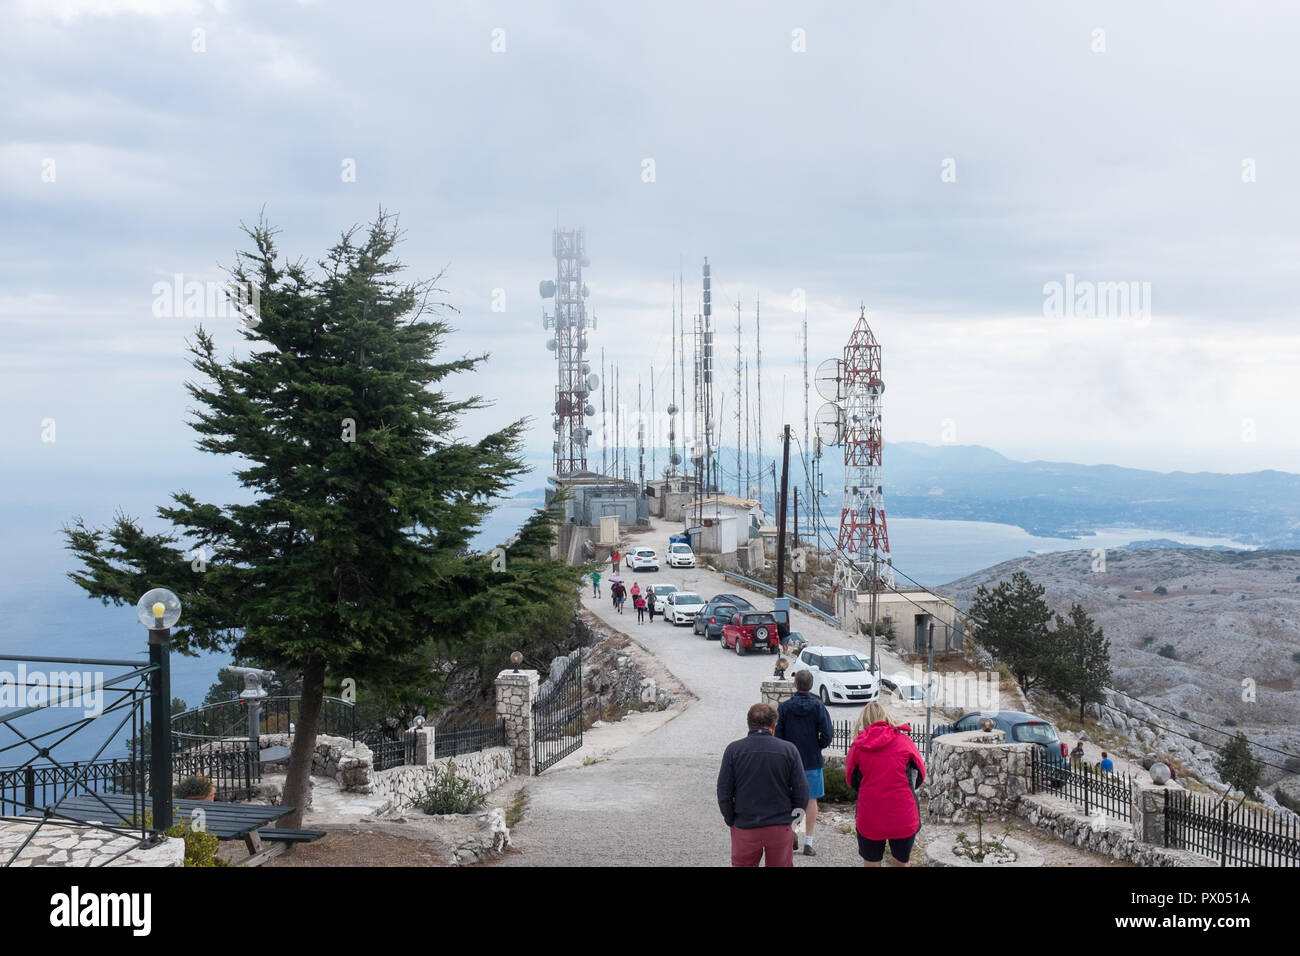 Telecommunications masts and aerials at Pantokrator, the highest point on the Greek island of Corfu Stock Photo